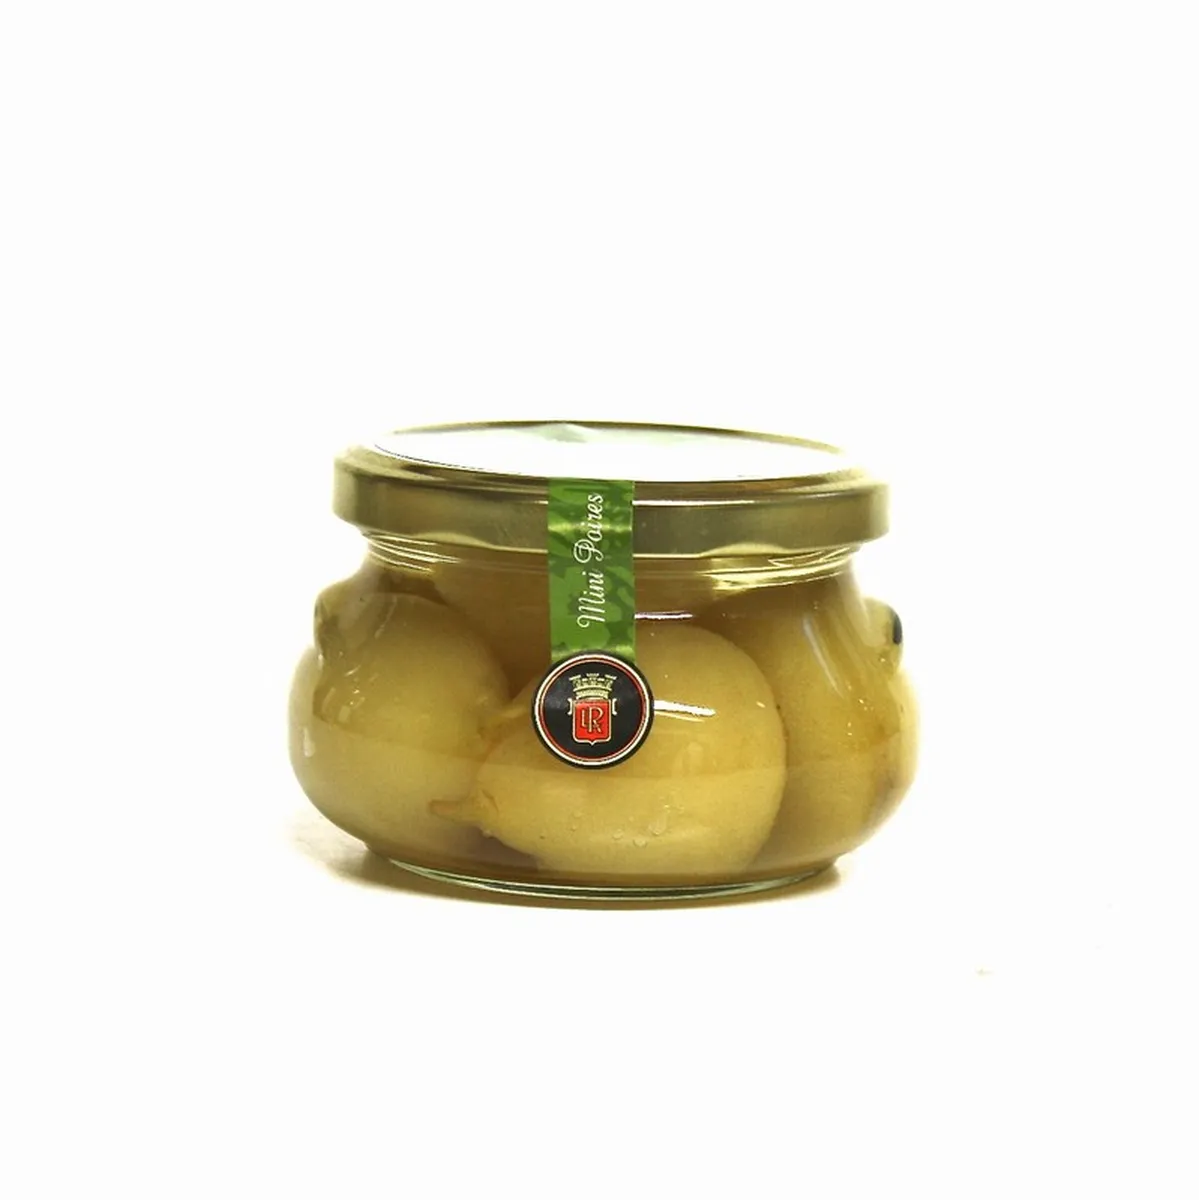 MINI PEARS REFRIGERATED WITH PEARL LIVER SOUILLAC 280G